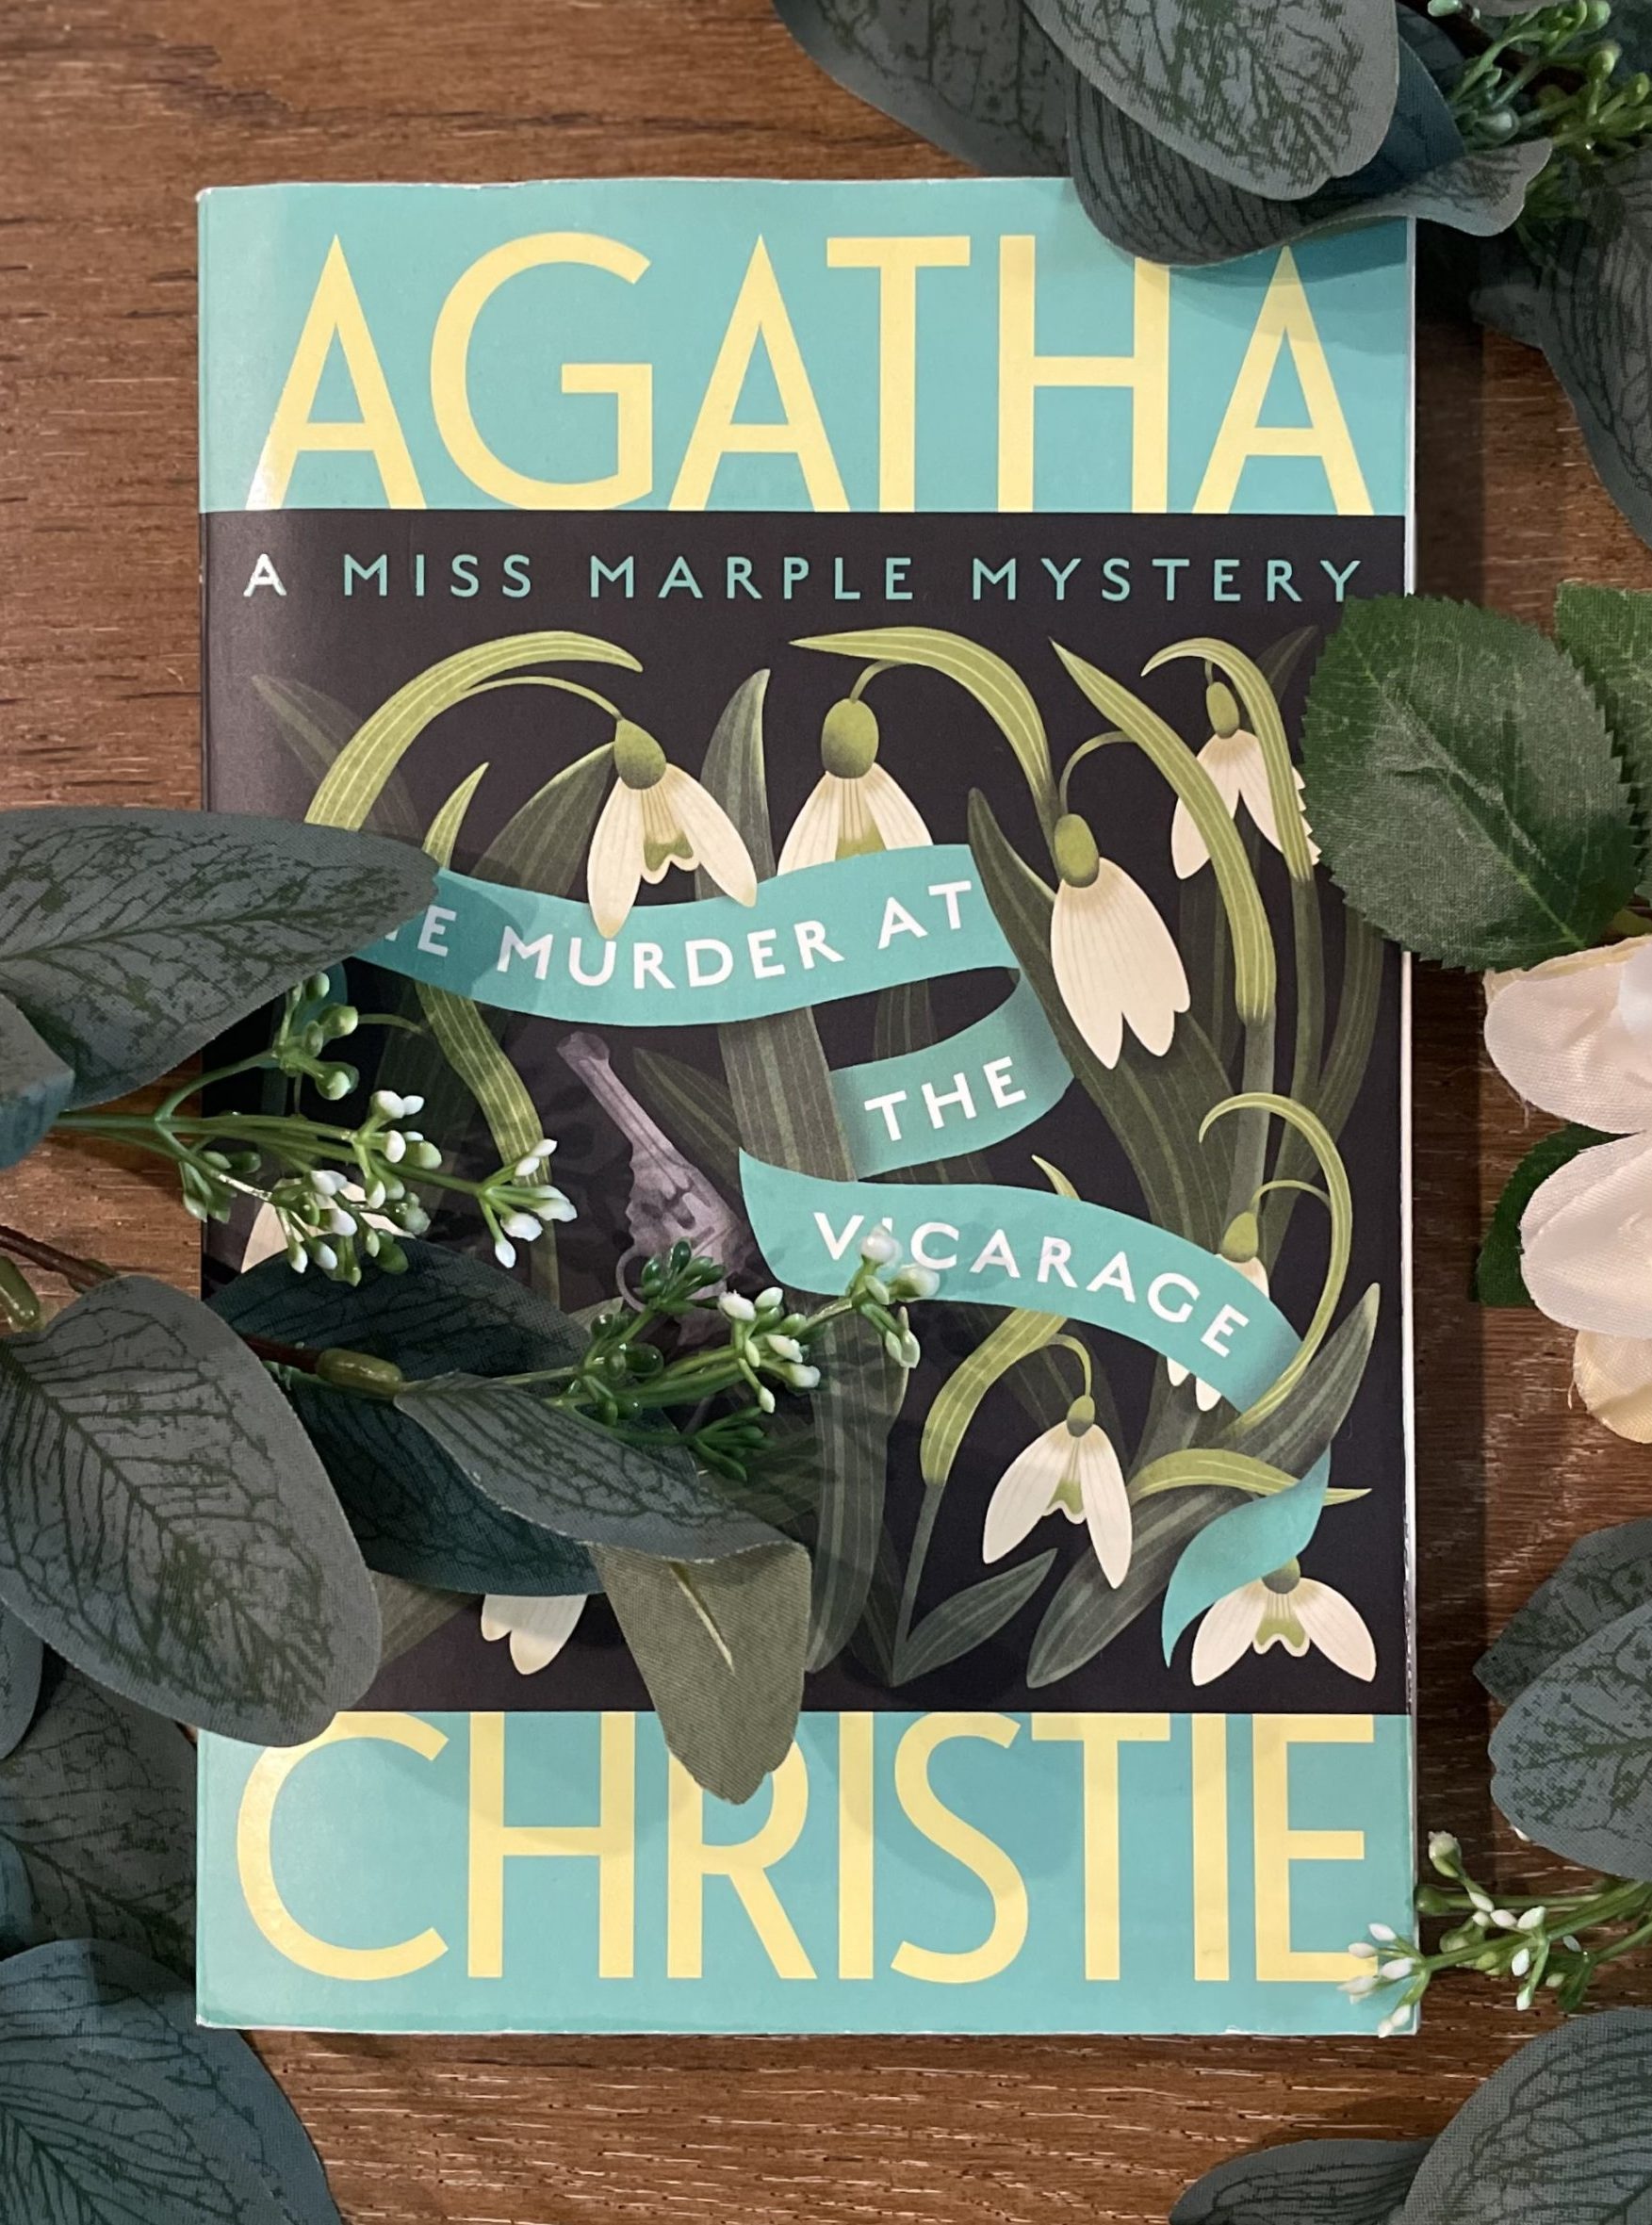 The Murder at the Vicarage Part 1: What makes a good Miss Marple novel?